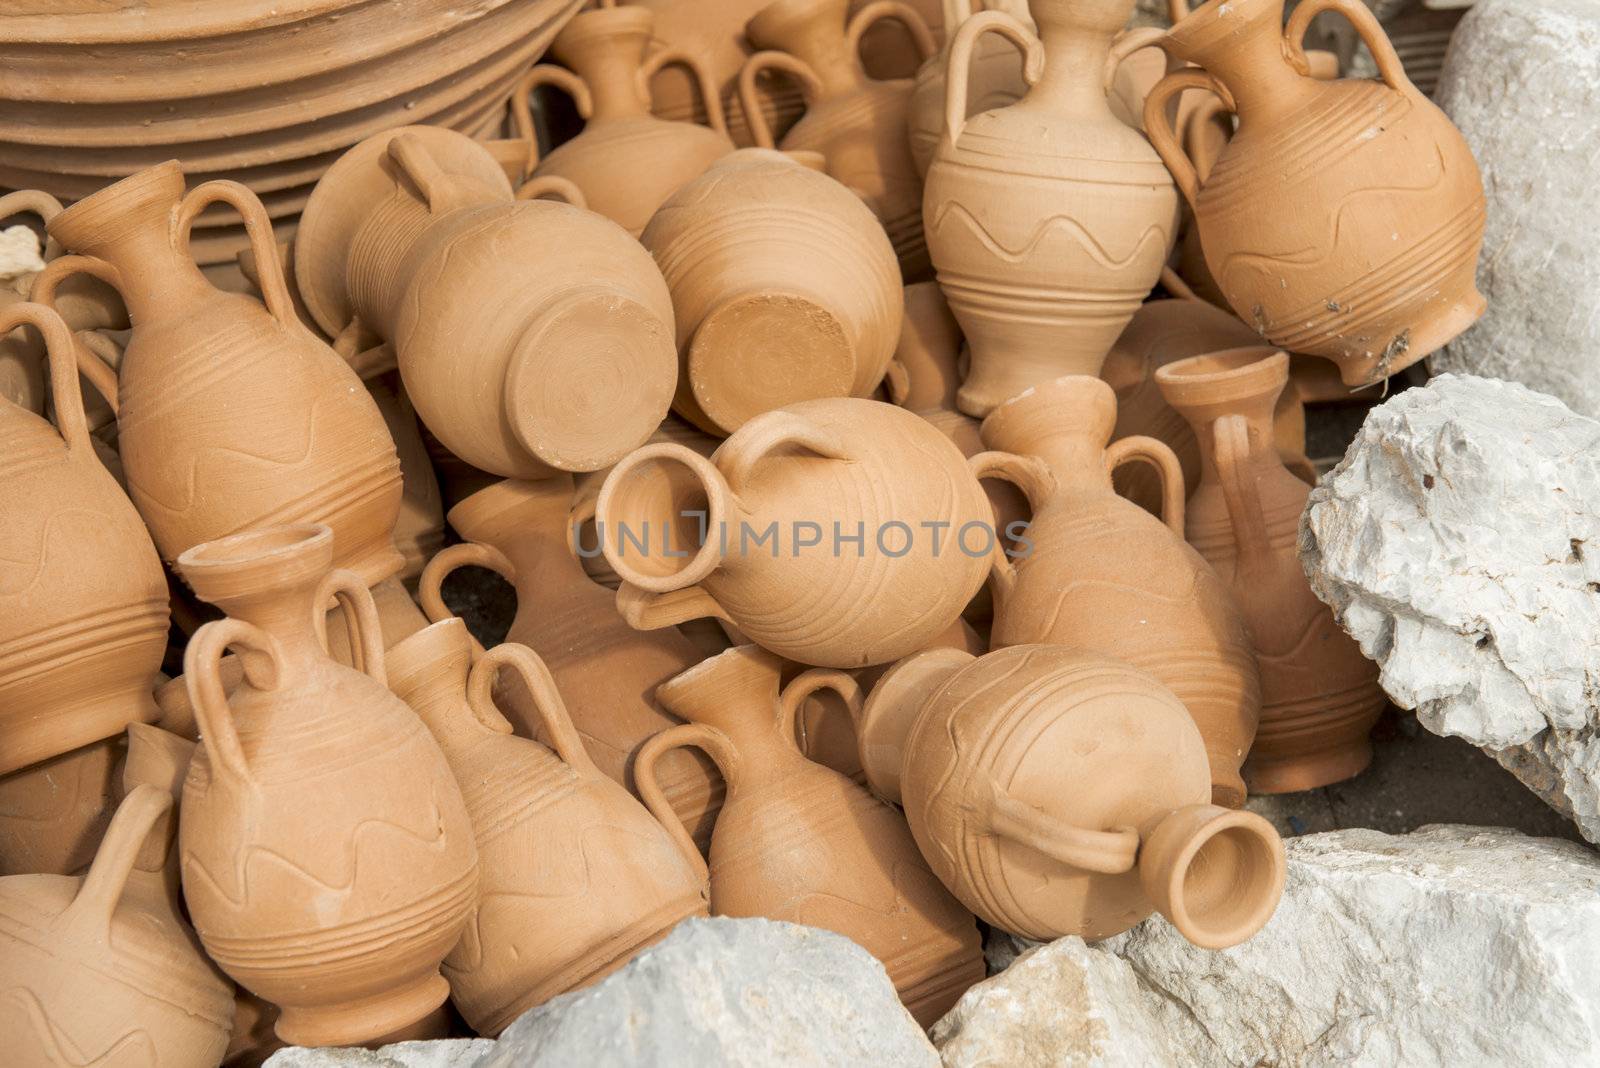 Greece ceramic pots in the gifts shop in Crete.